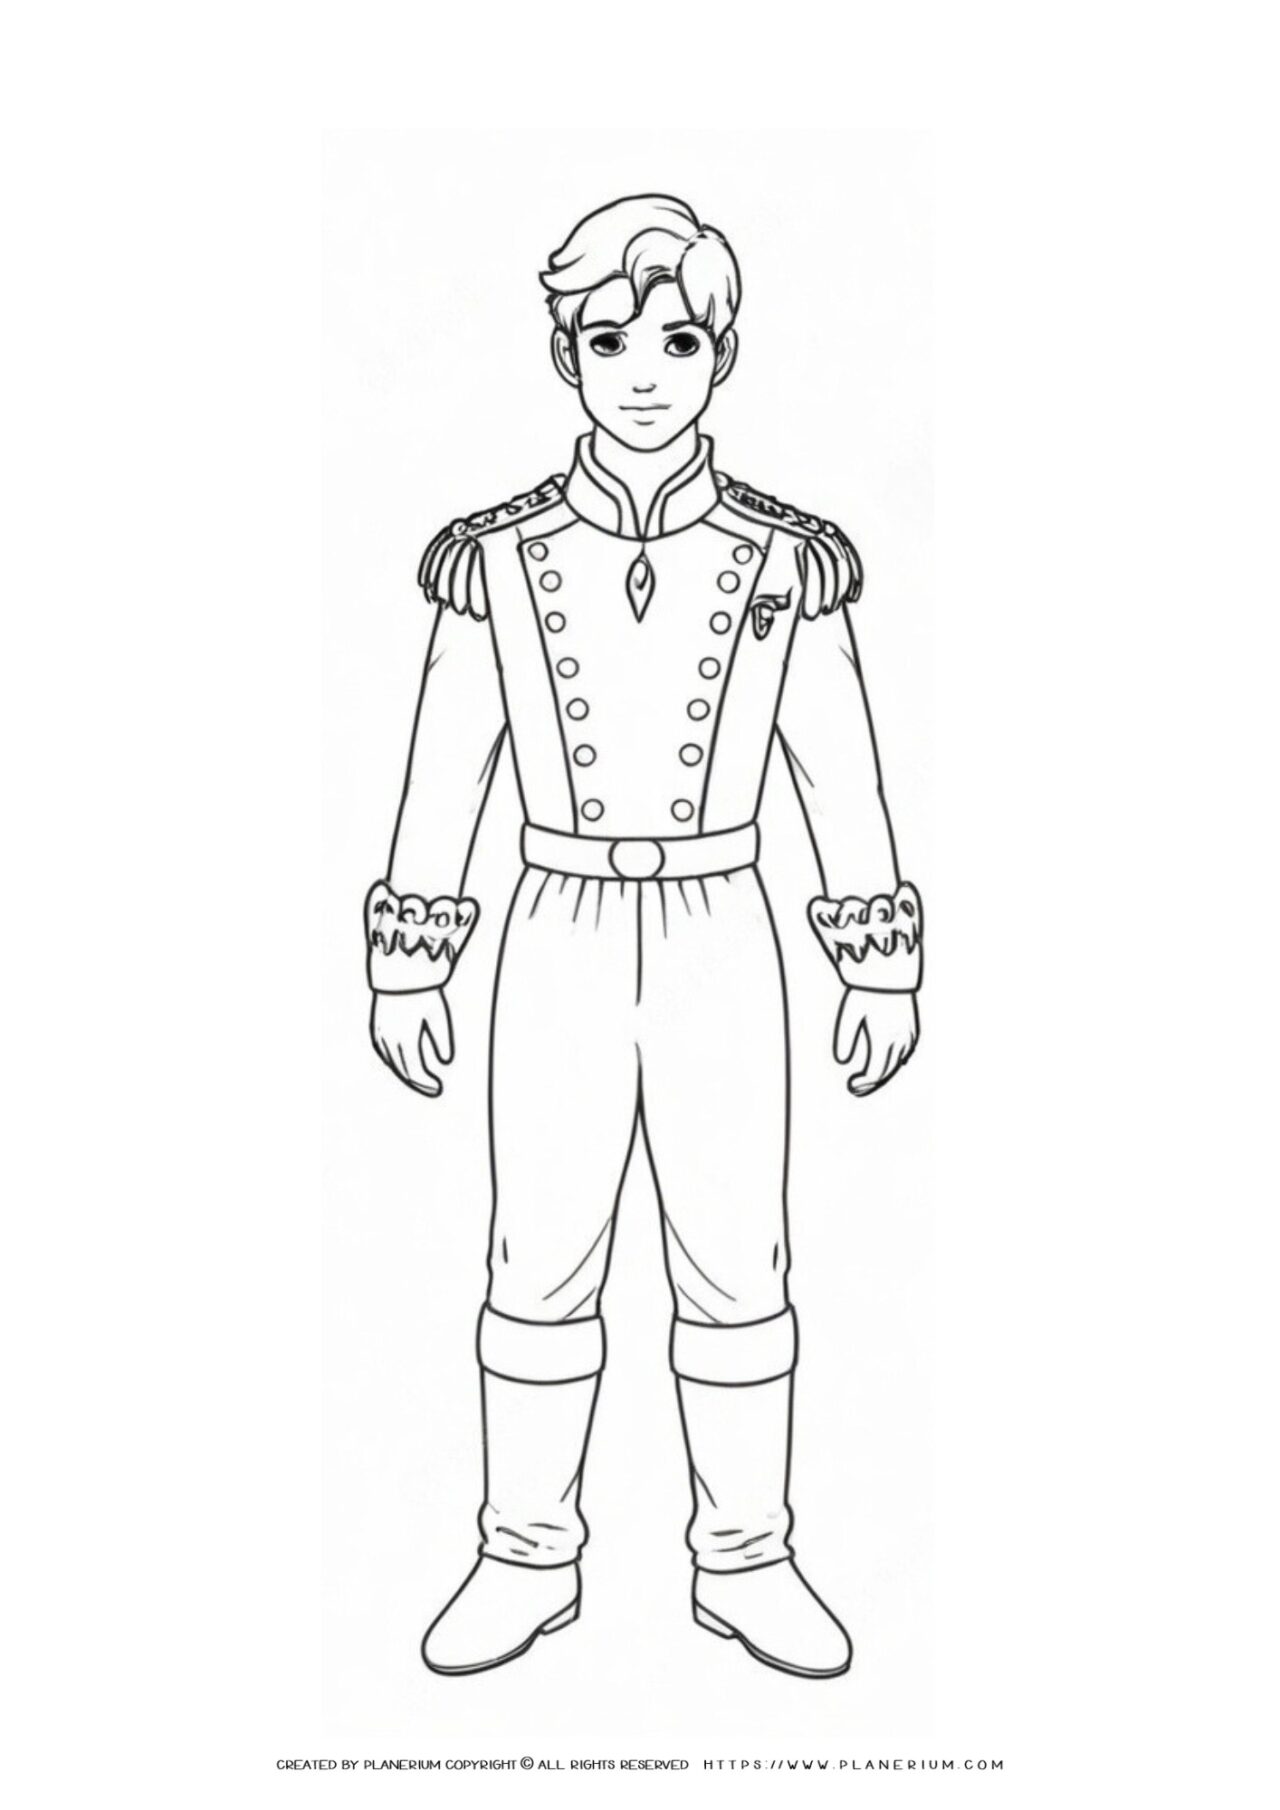 Illustration of prince character for coloring book.